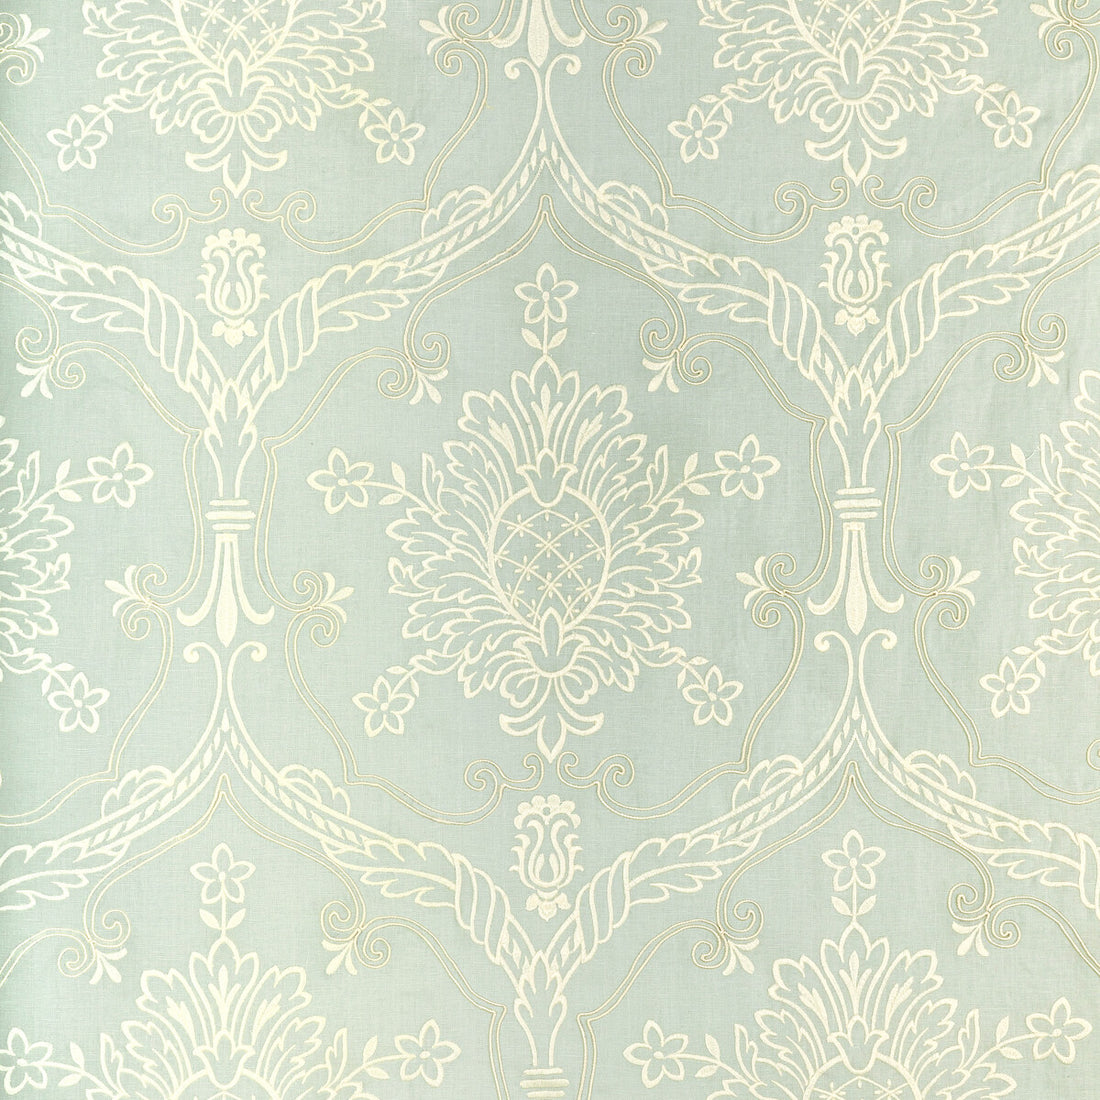 Hayes Embroidery fabric in aqua color - pattern 2022110.13.0 - by Lee Jofa in the Bunny Williams Arcadia collection